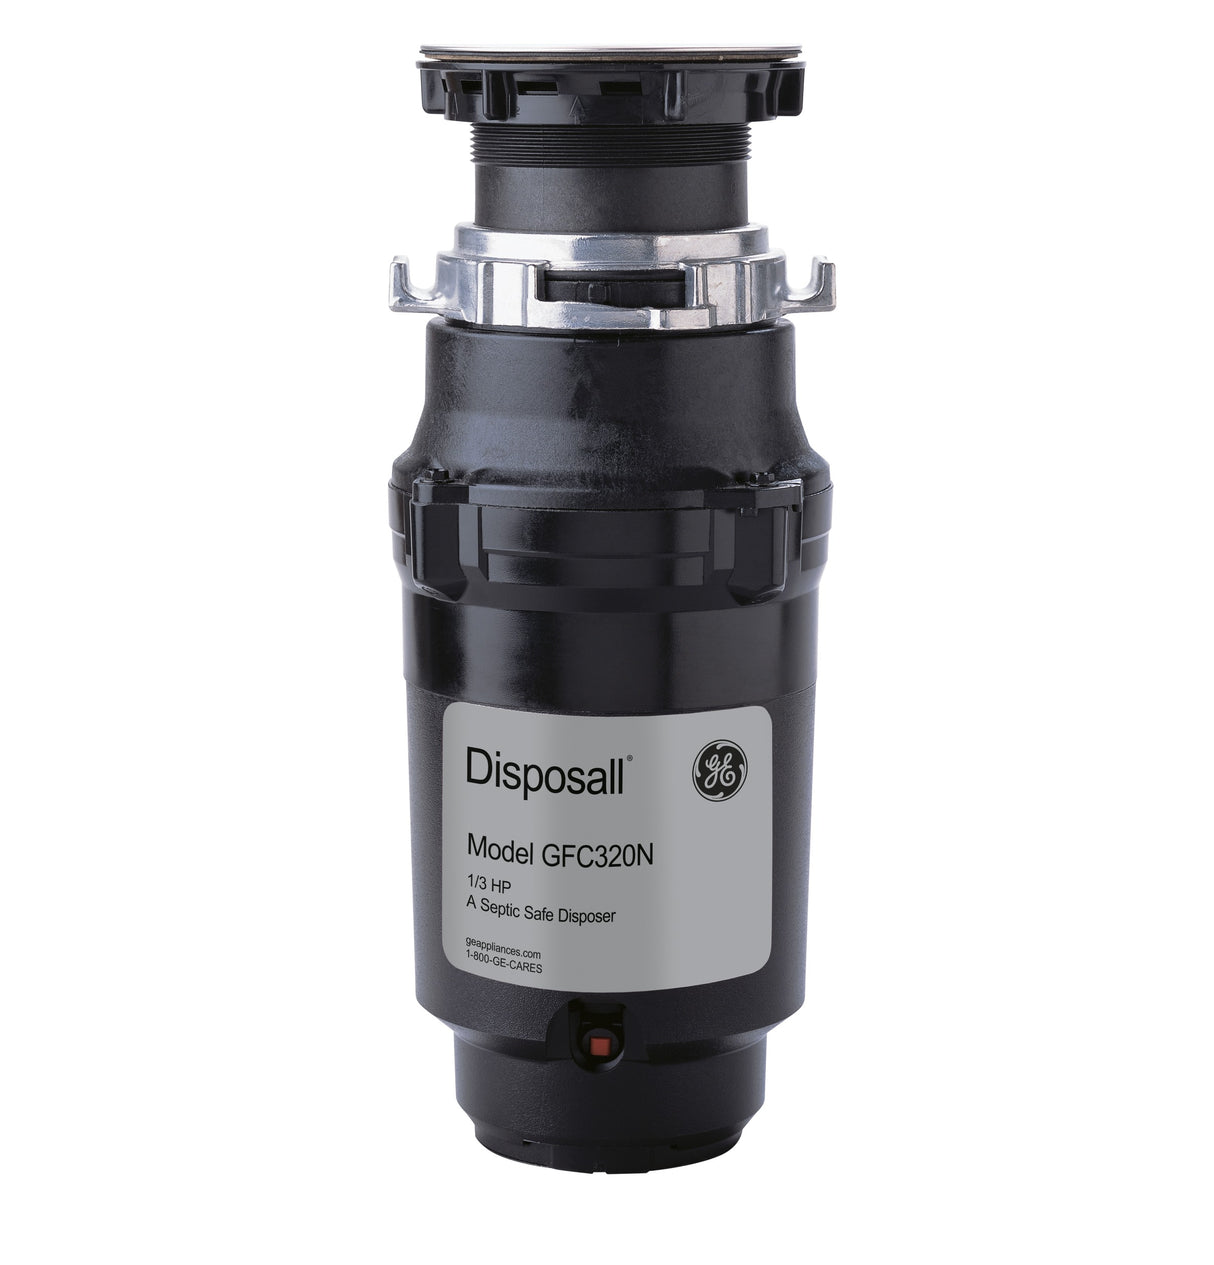 GE DISPOSALL(R) 1/3 HP Continuous Feed Garbage Disposer Non-Corded - (GFC320N)